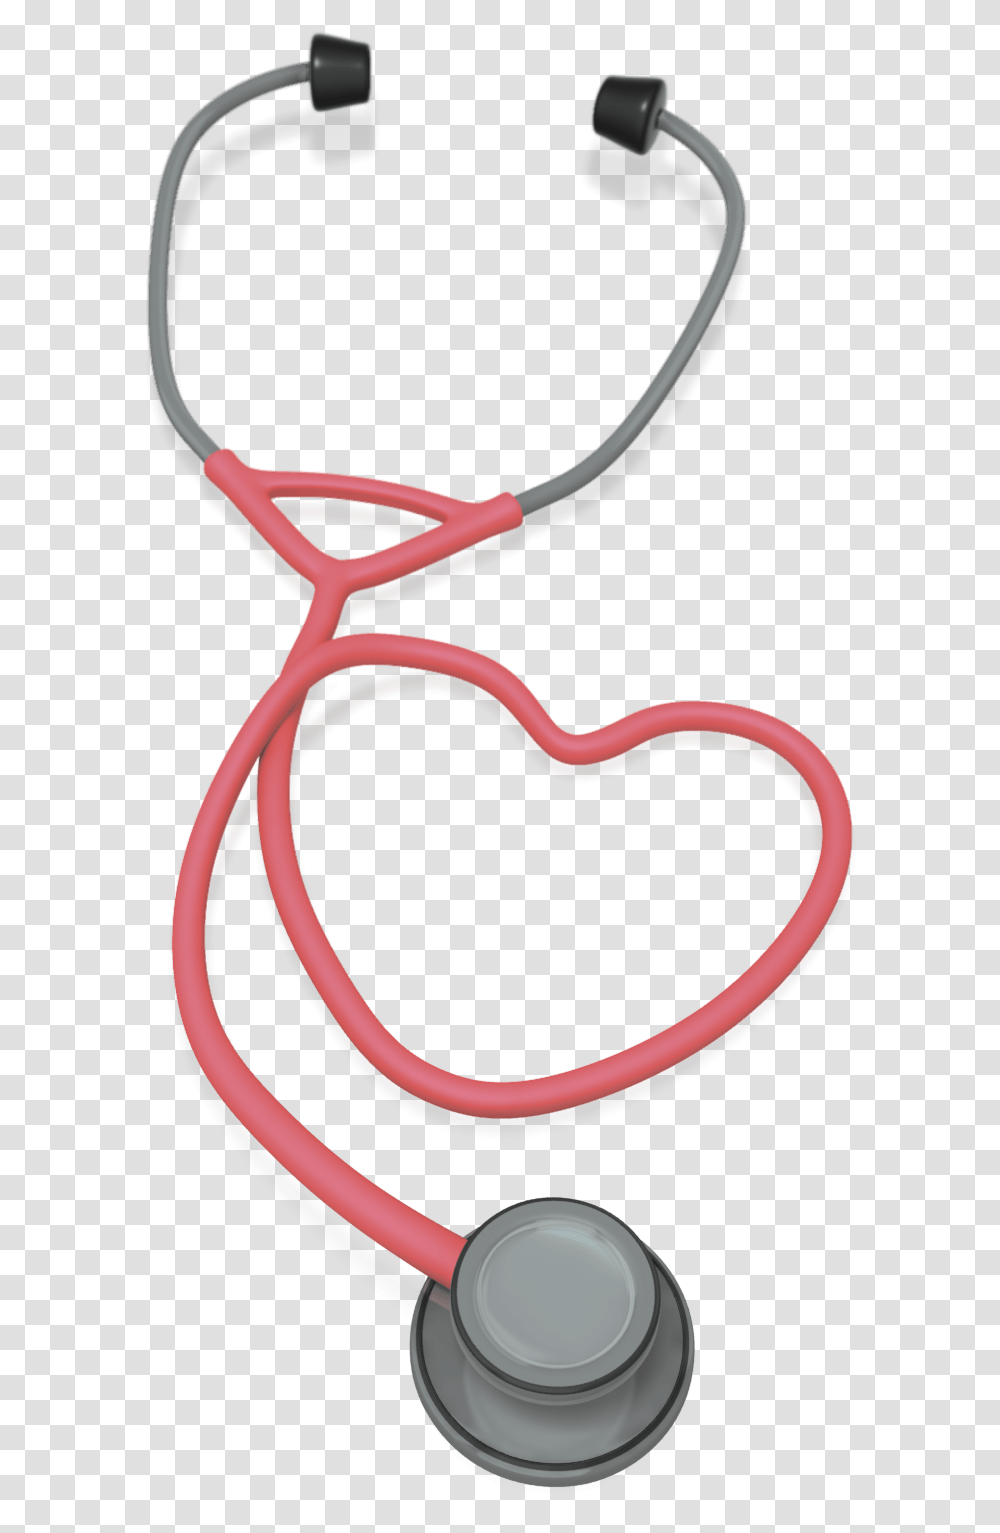 Heart Stethoscope Clipart Image Stethoscope Image Background, Maroon, Leash Transparent Png